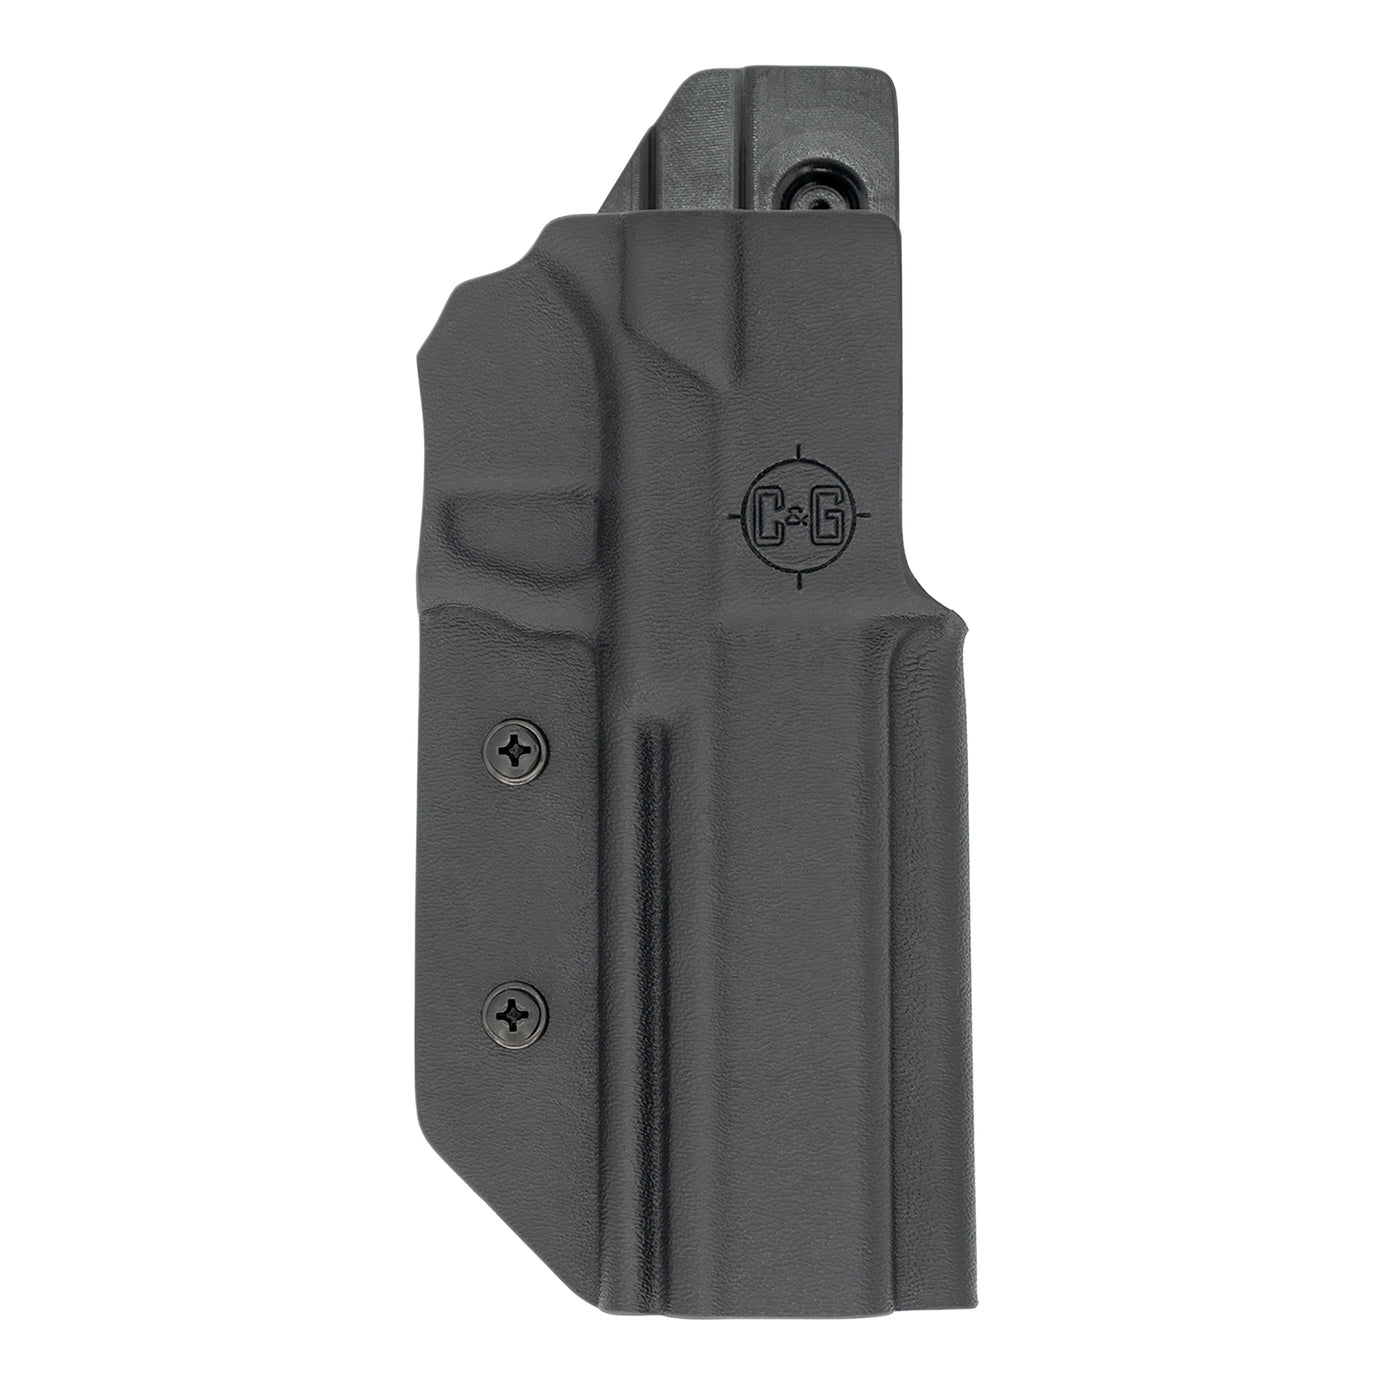 The custom C&G Holsters Competition Holster for the Polymer 80 PF9/40v2